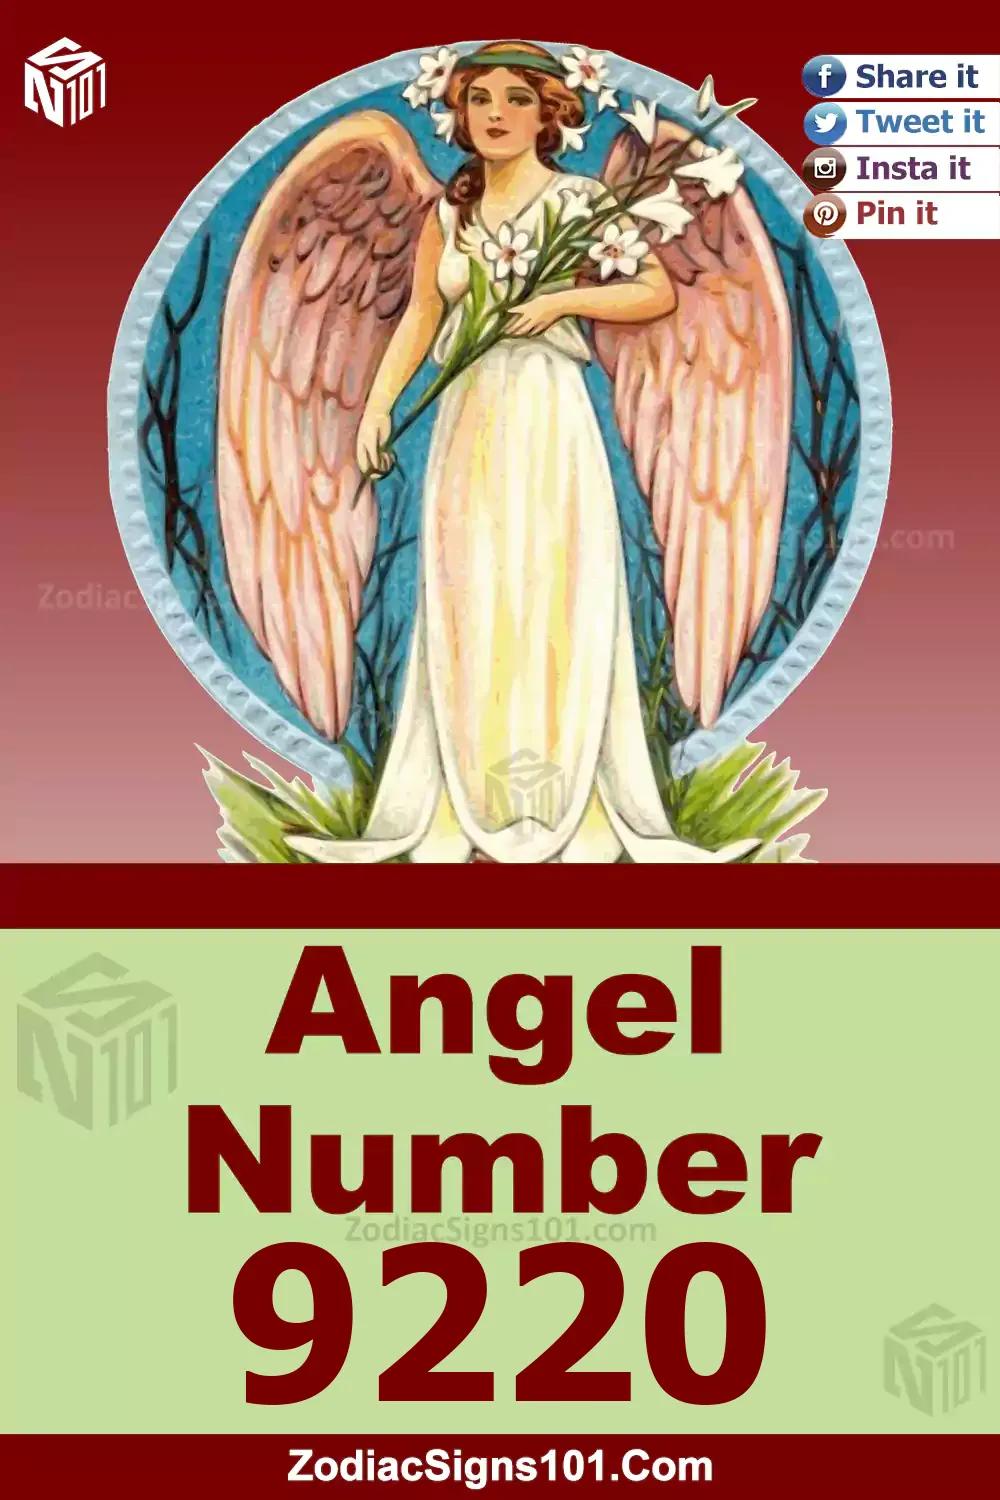 9220 Angel Number Meaning